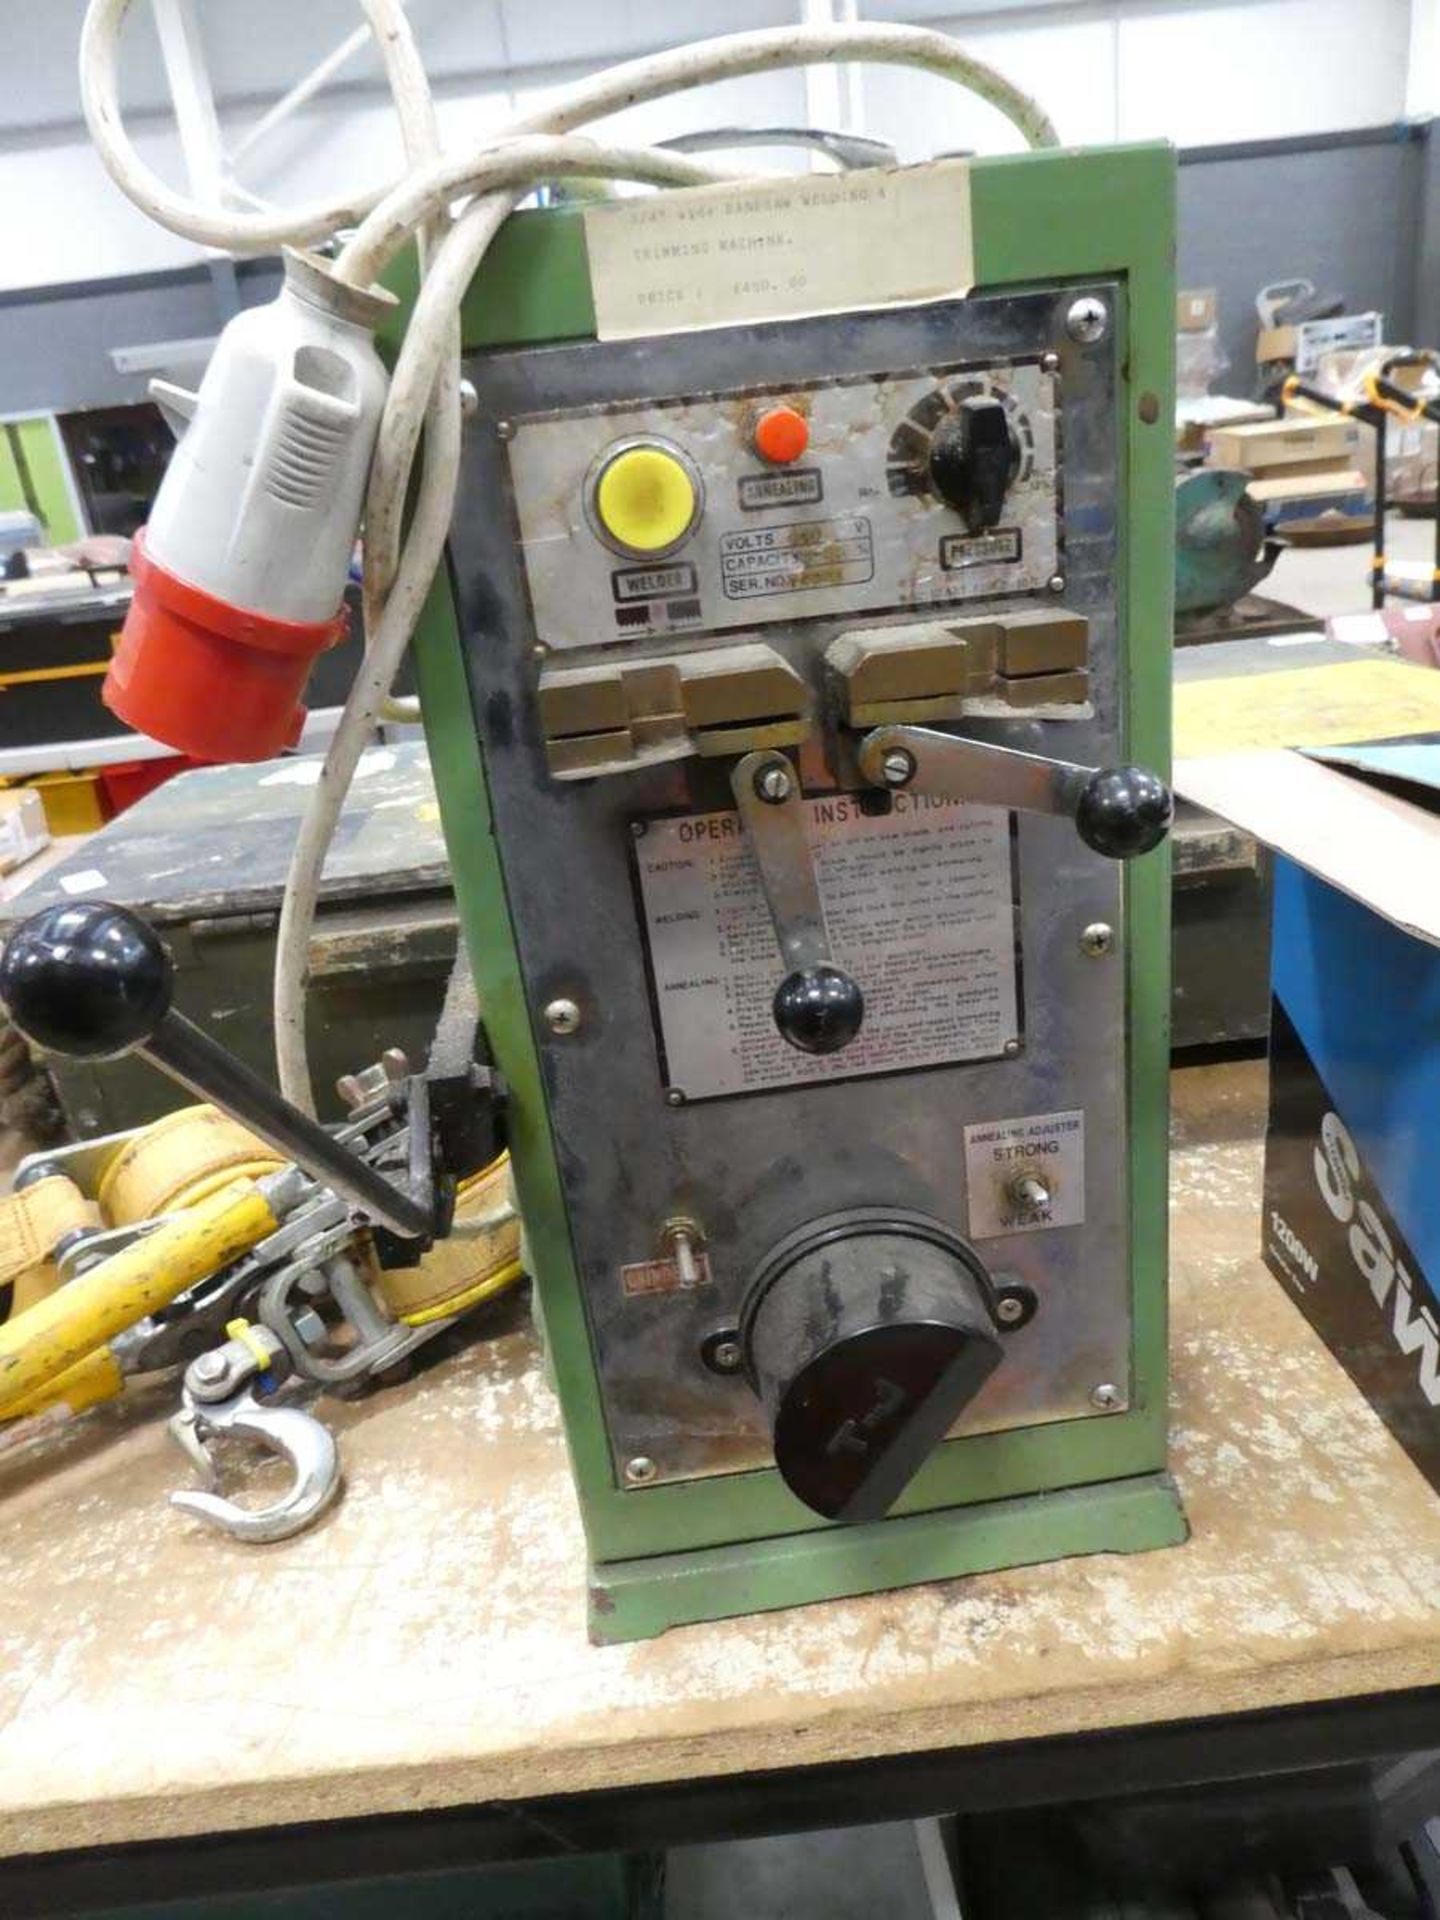 Band saw welding and trimming machine